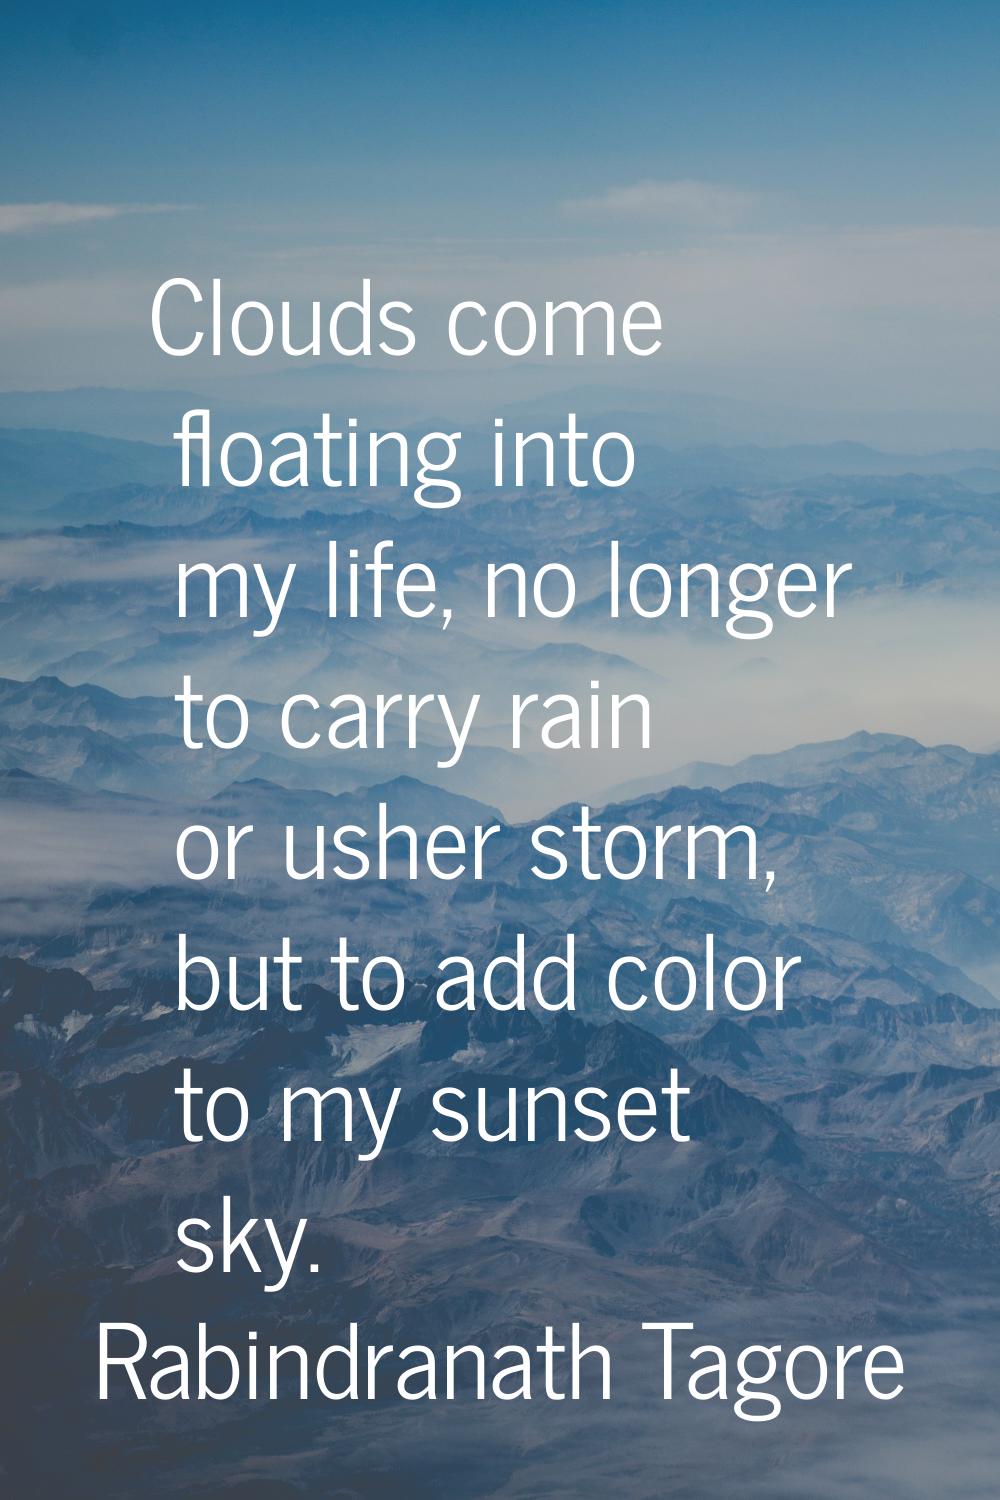 Clouds come floating into my life, no longer to carry rain or usher storm, but to add color to my s